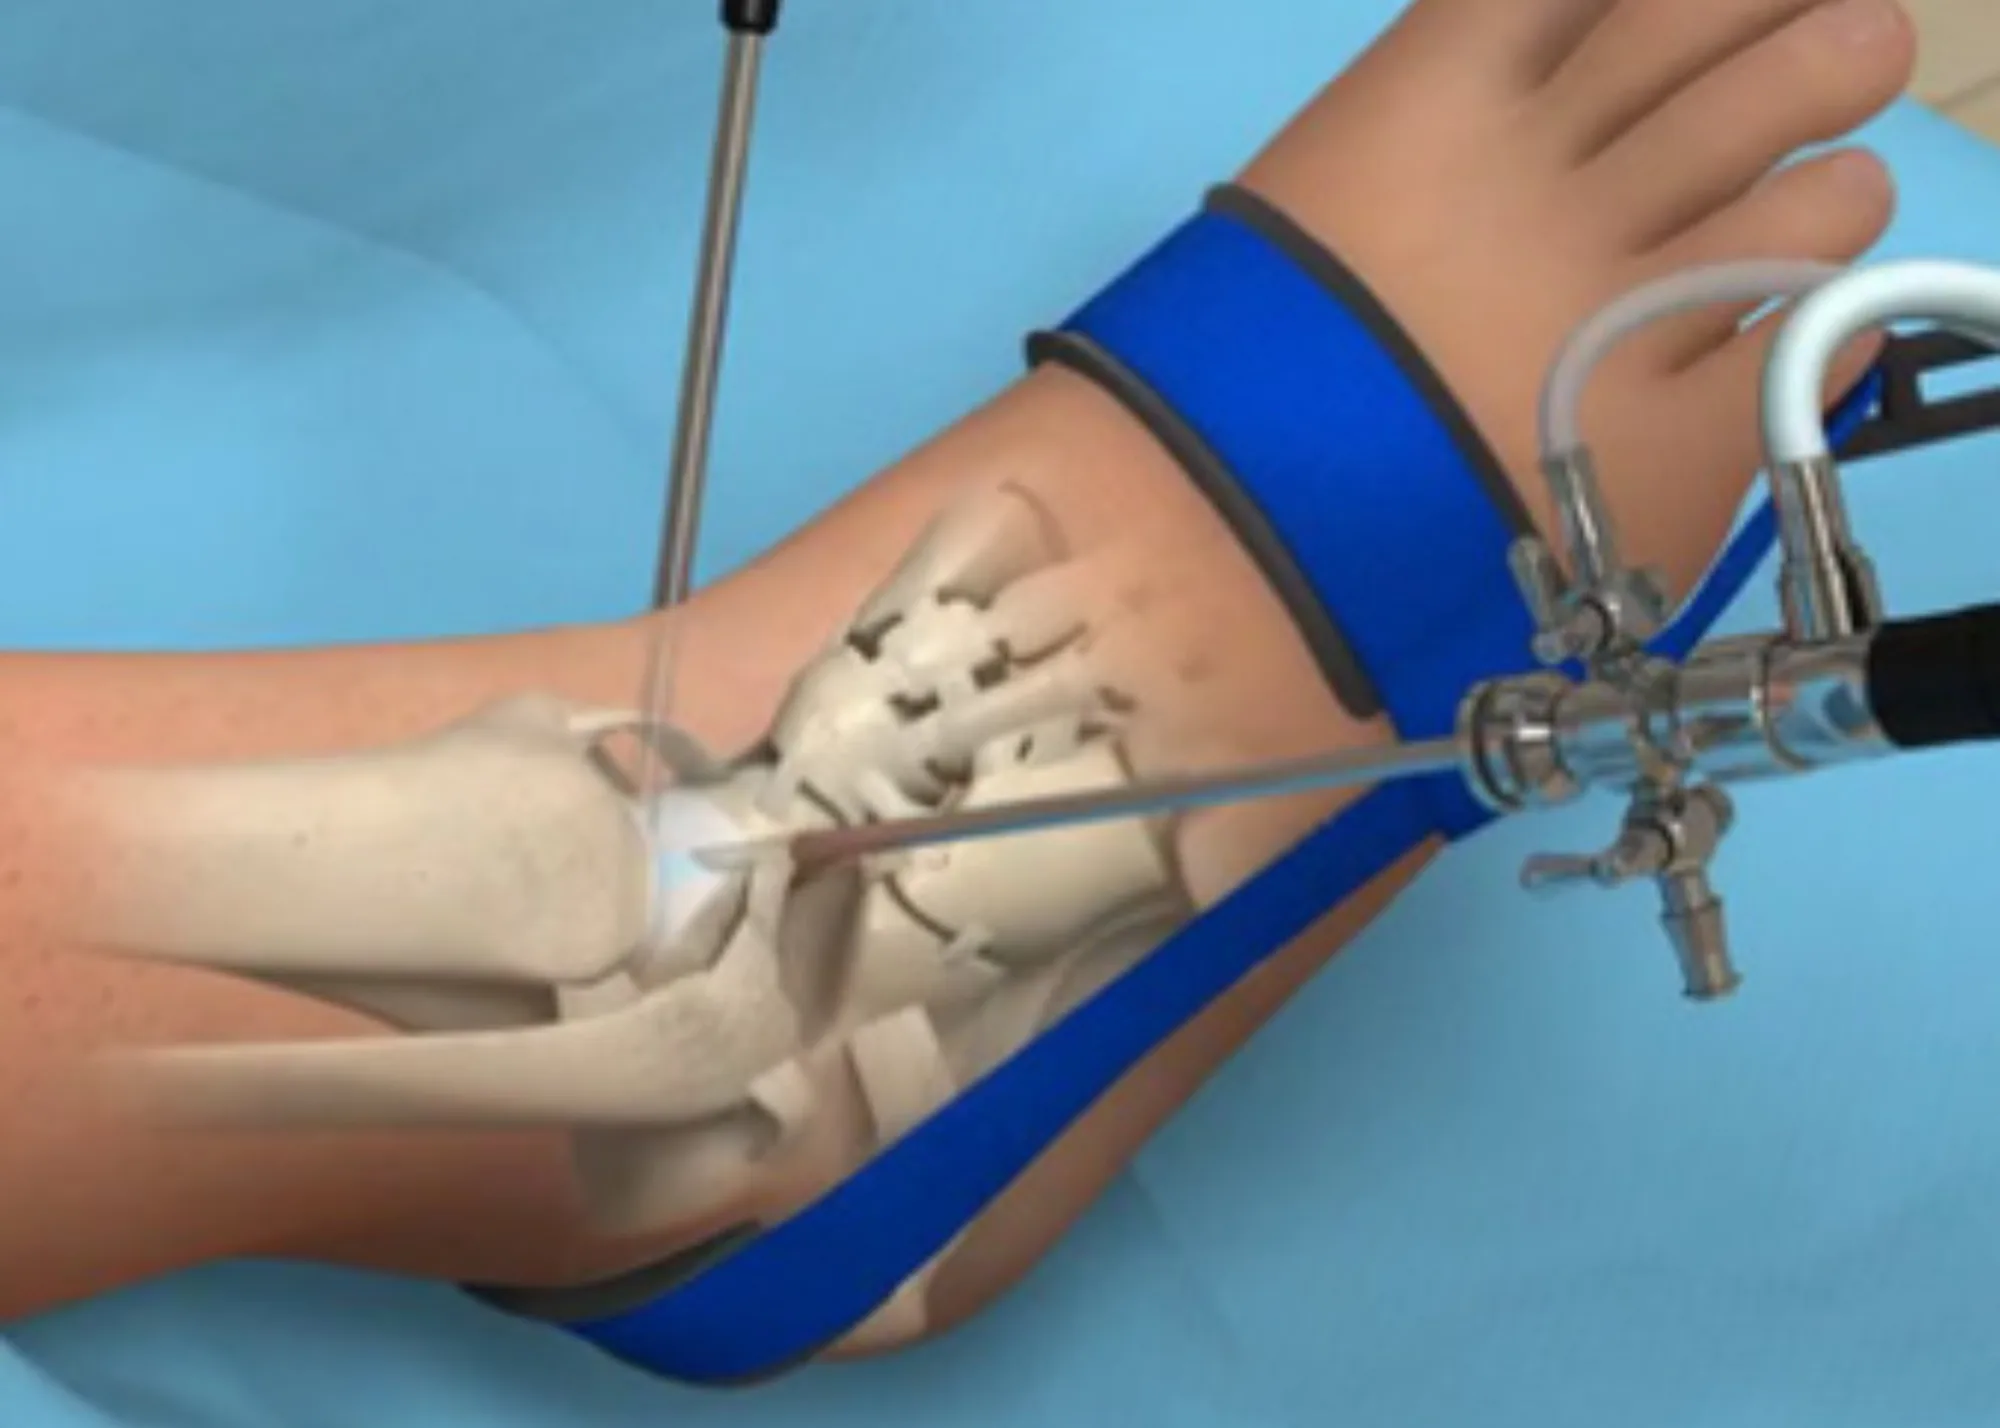 Click for Ankle Athroscopy information & discuss with Dr. Christensen to determine treatment options from North Shore Foot & Ankle located in Appleton, WI.